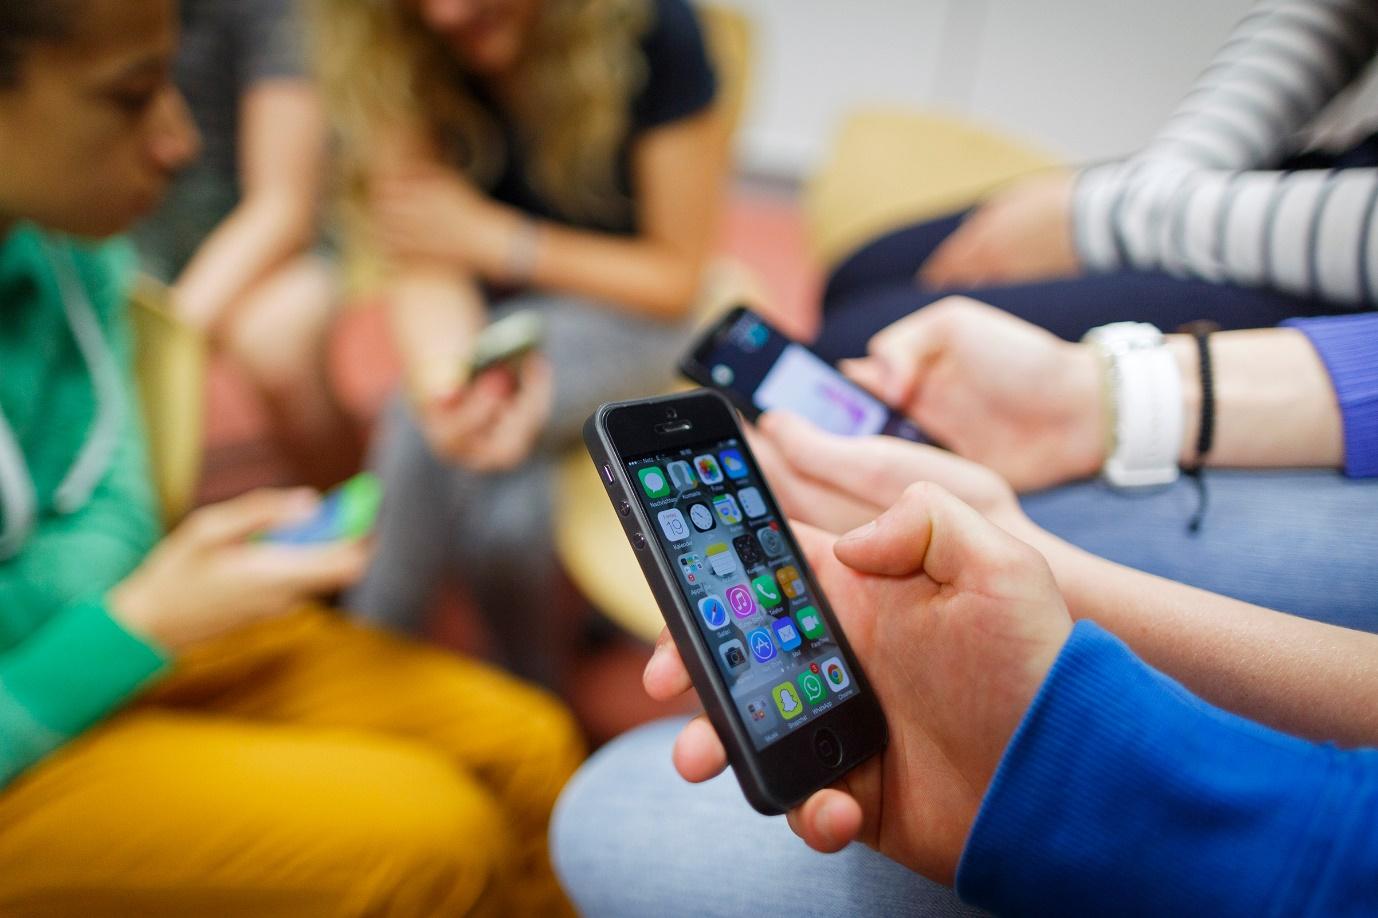 Too Much Phone Use Can Hurt. But You Can Protect Your Teen | Time